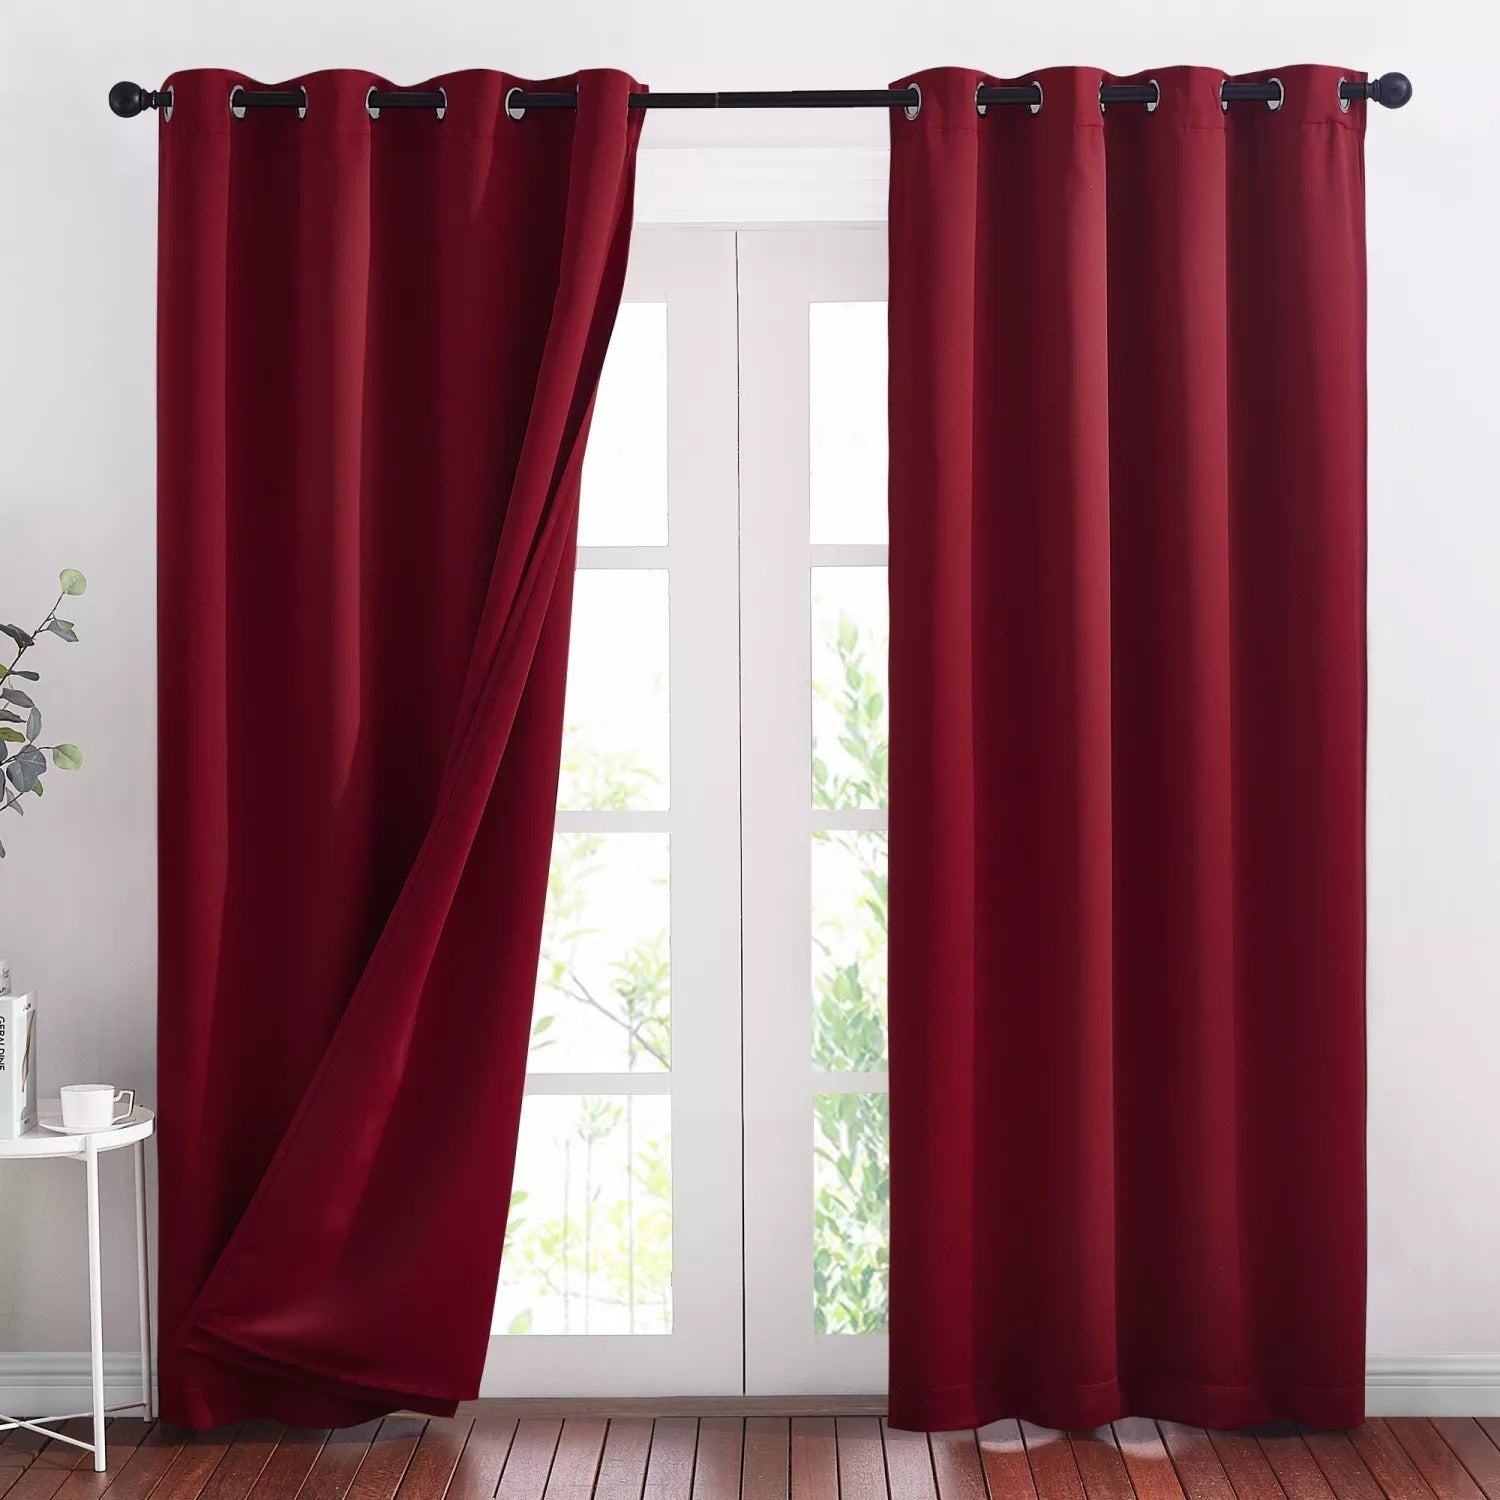 Grommet Thermal Soundproof Blackout Curtains For Living Room, Bedroom, 2 Panels KGORGE Store